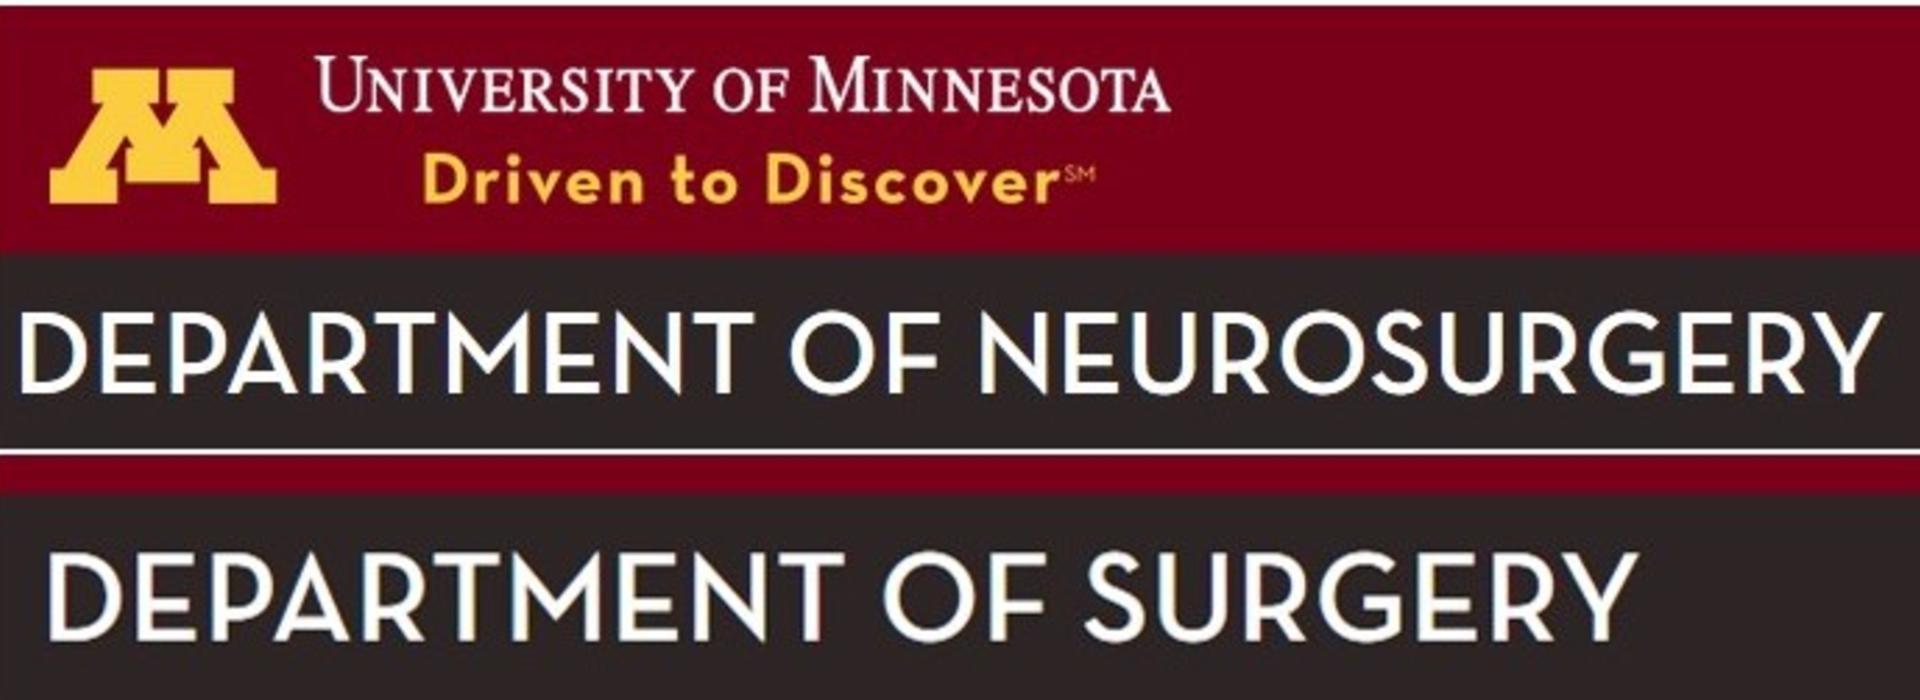 Departments of General Surgery and Neurosurgery